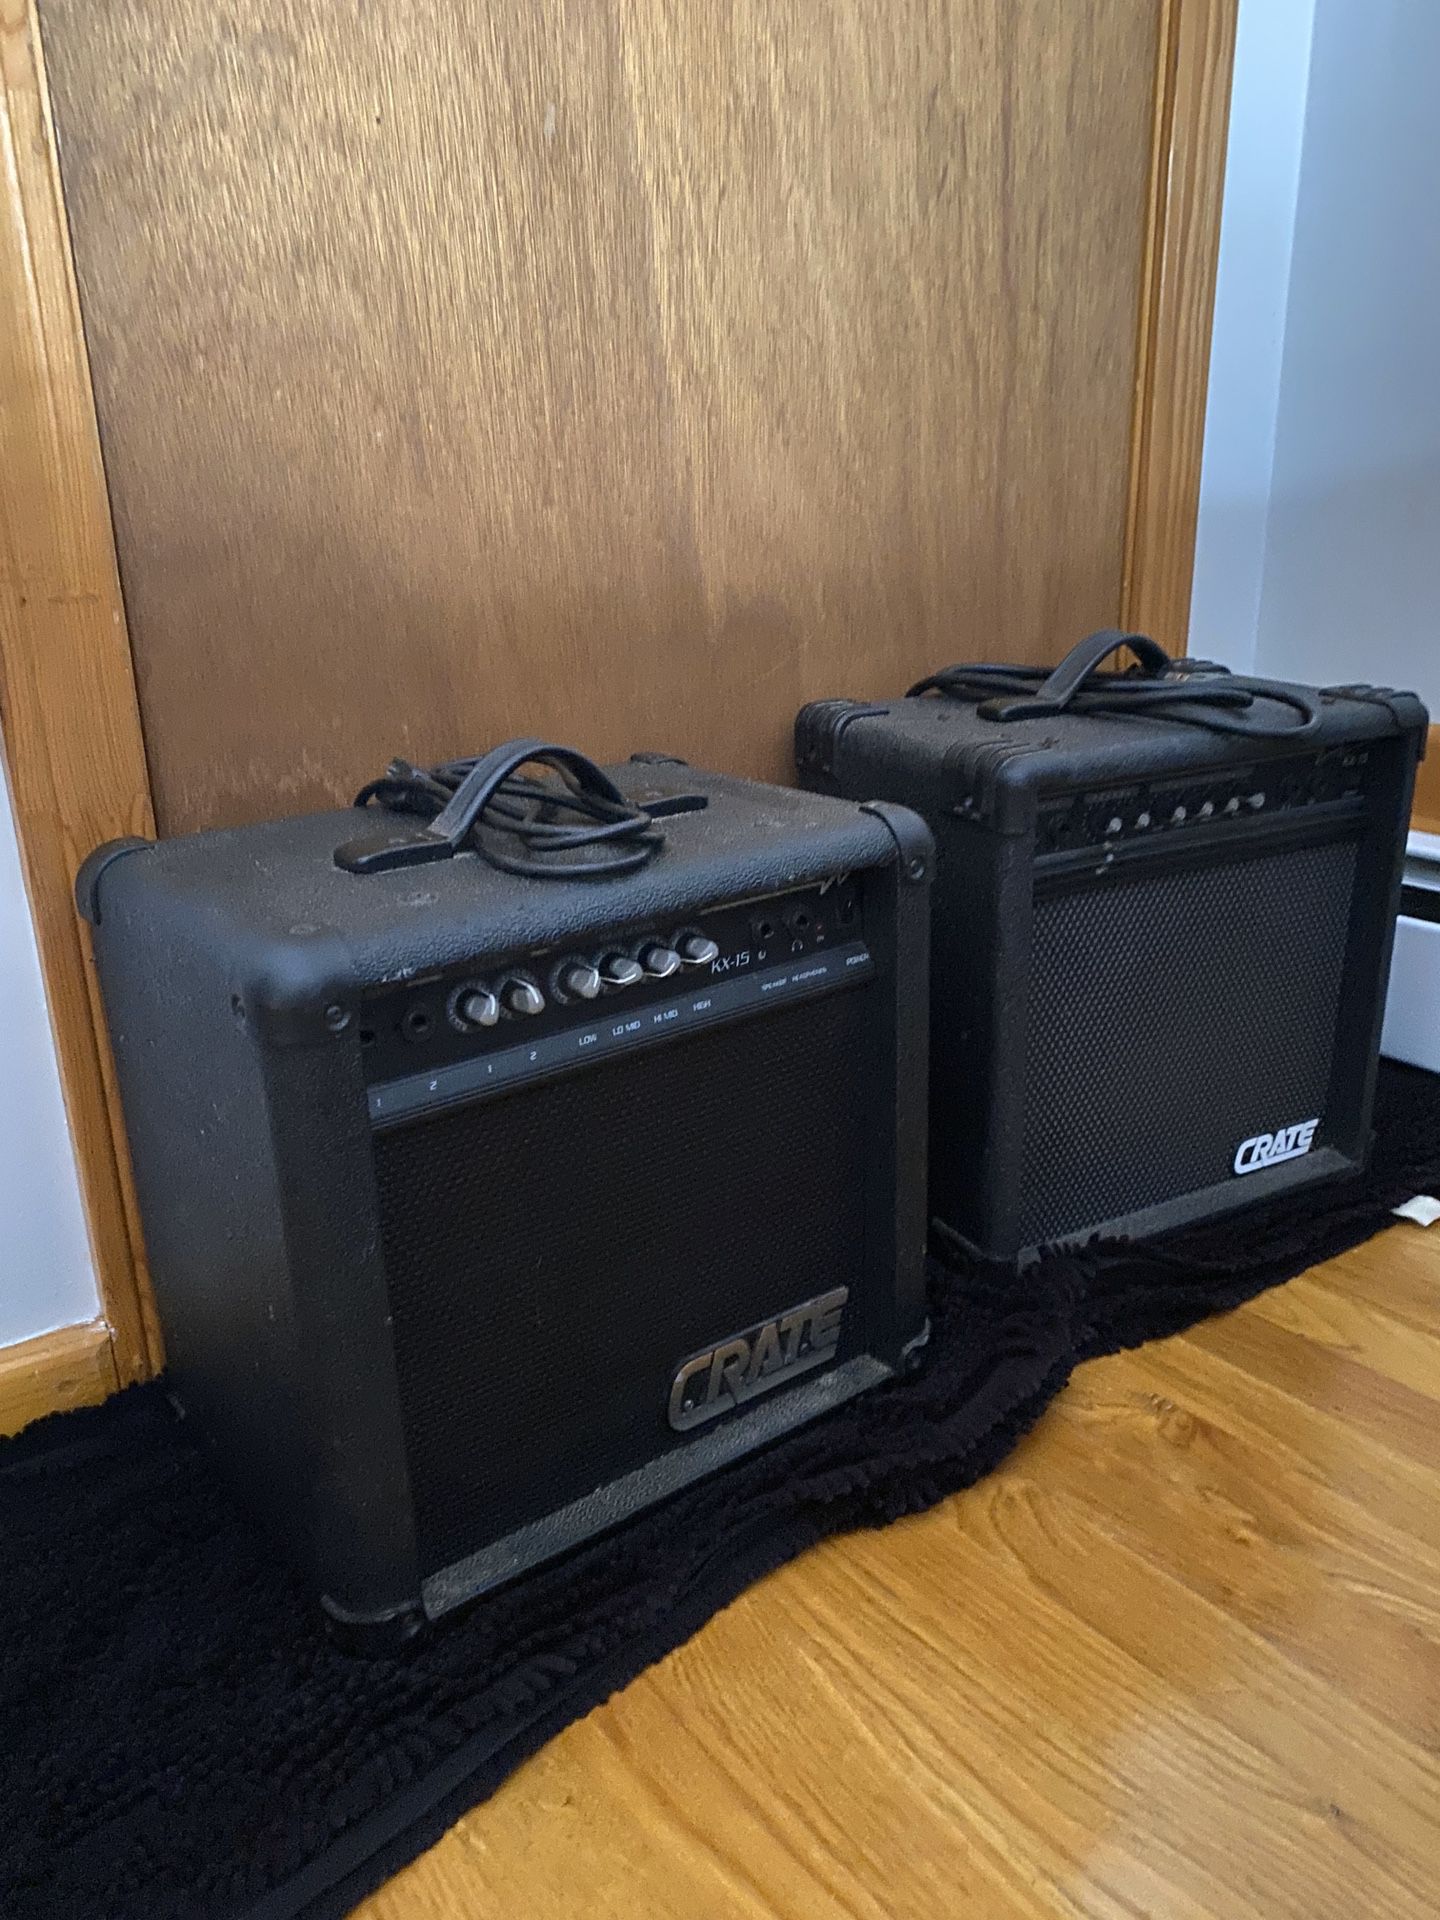 CRATE ELECTRIC GUITAR AMPLIFIER PRACTICE AMPS FOR SALE -